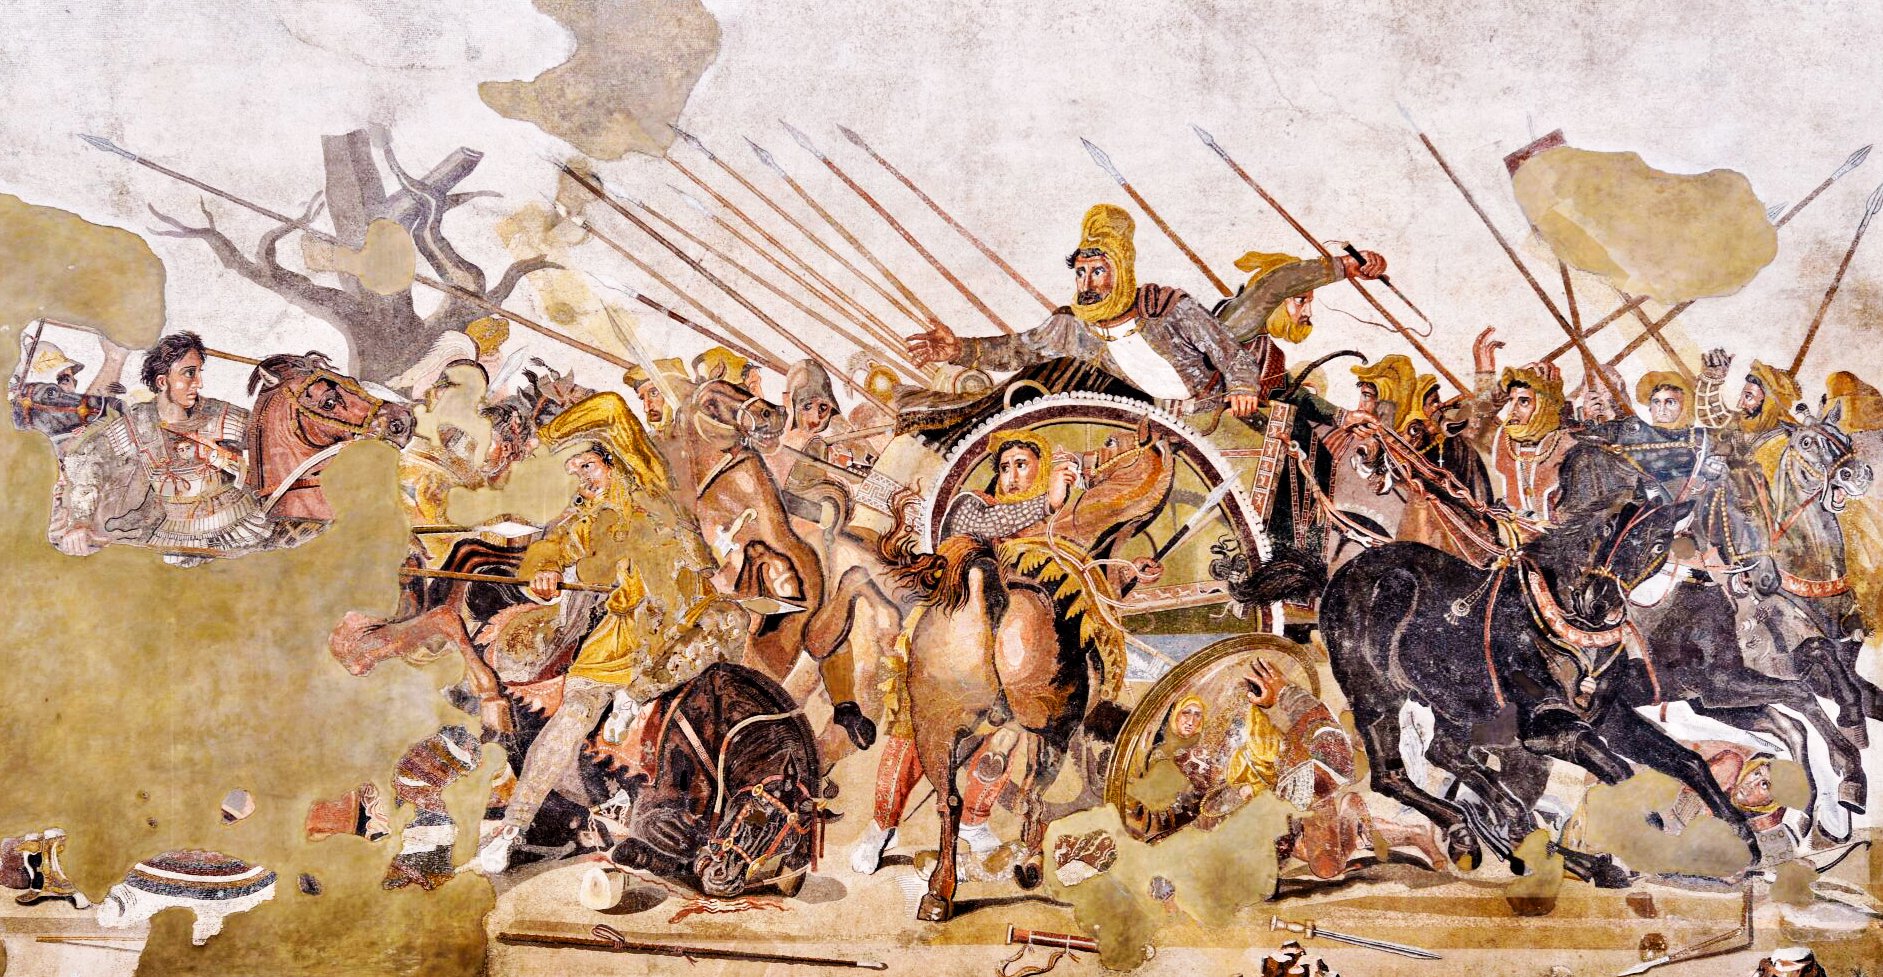 An ancient fresco depicting a heated battle between the forces of Darius and Alexander. Vibrantly colored soldiers on horseback engage in combat, with spears and arrows flying through the air. Prominent figures, possibly representing the leaders, are seen at the center, with Darius on a chariot and Alexander on a horse on the left. The scene captures the intensity and chaos of ancient warfare.